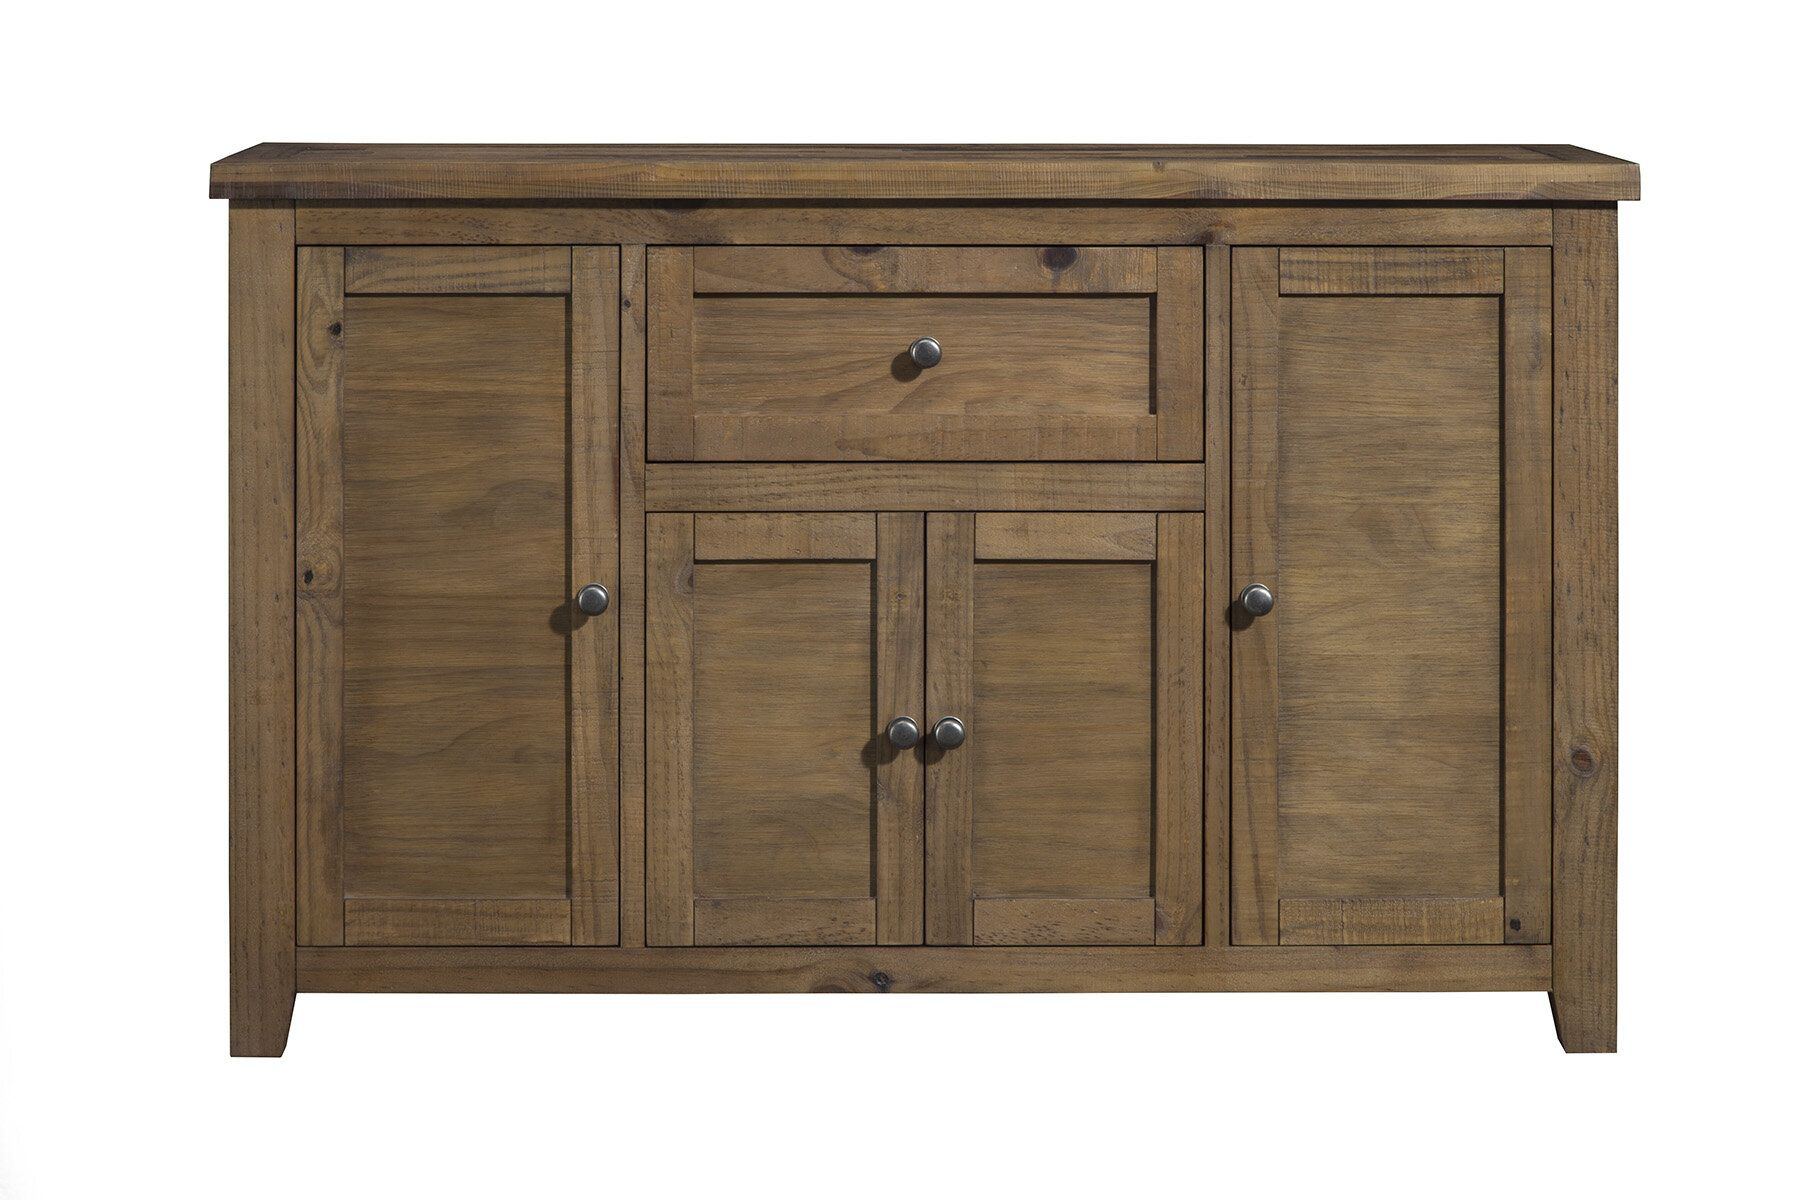 Details About Gracie Oaks Whitten Sideboard With Regard To Whitten Sideboards (Photo 1 of 30)